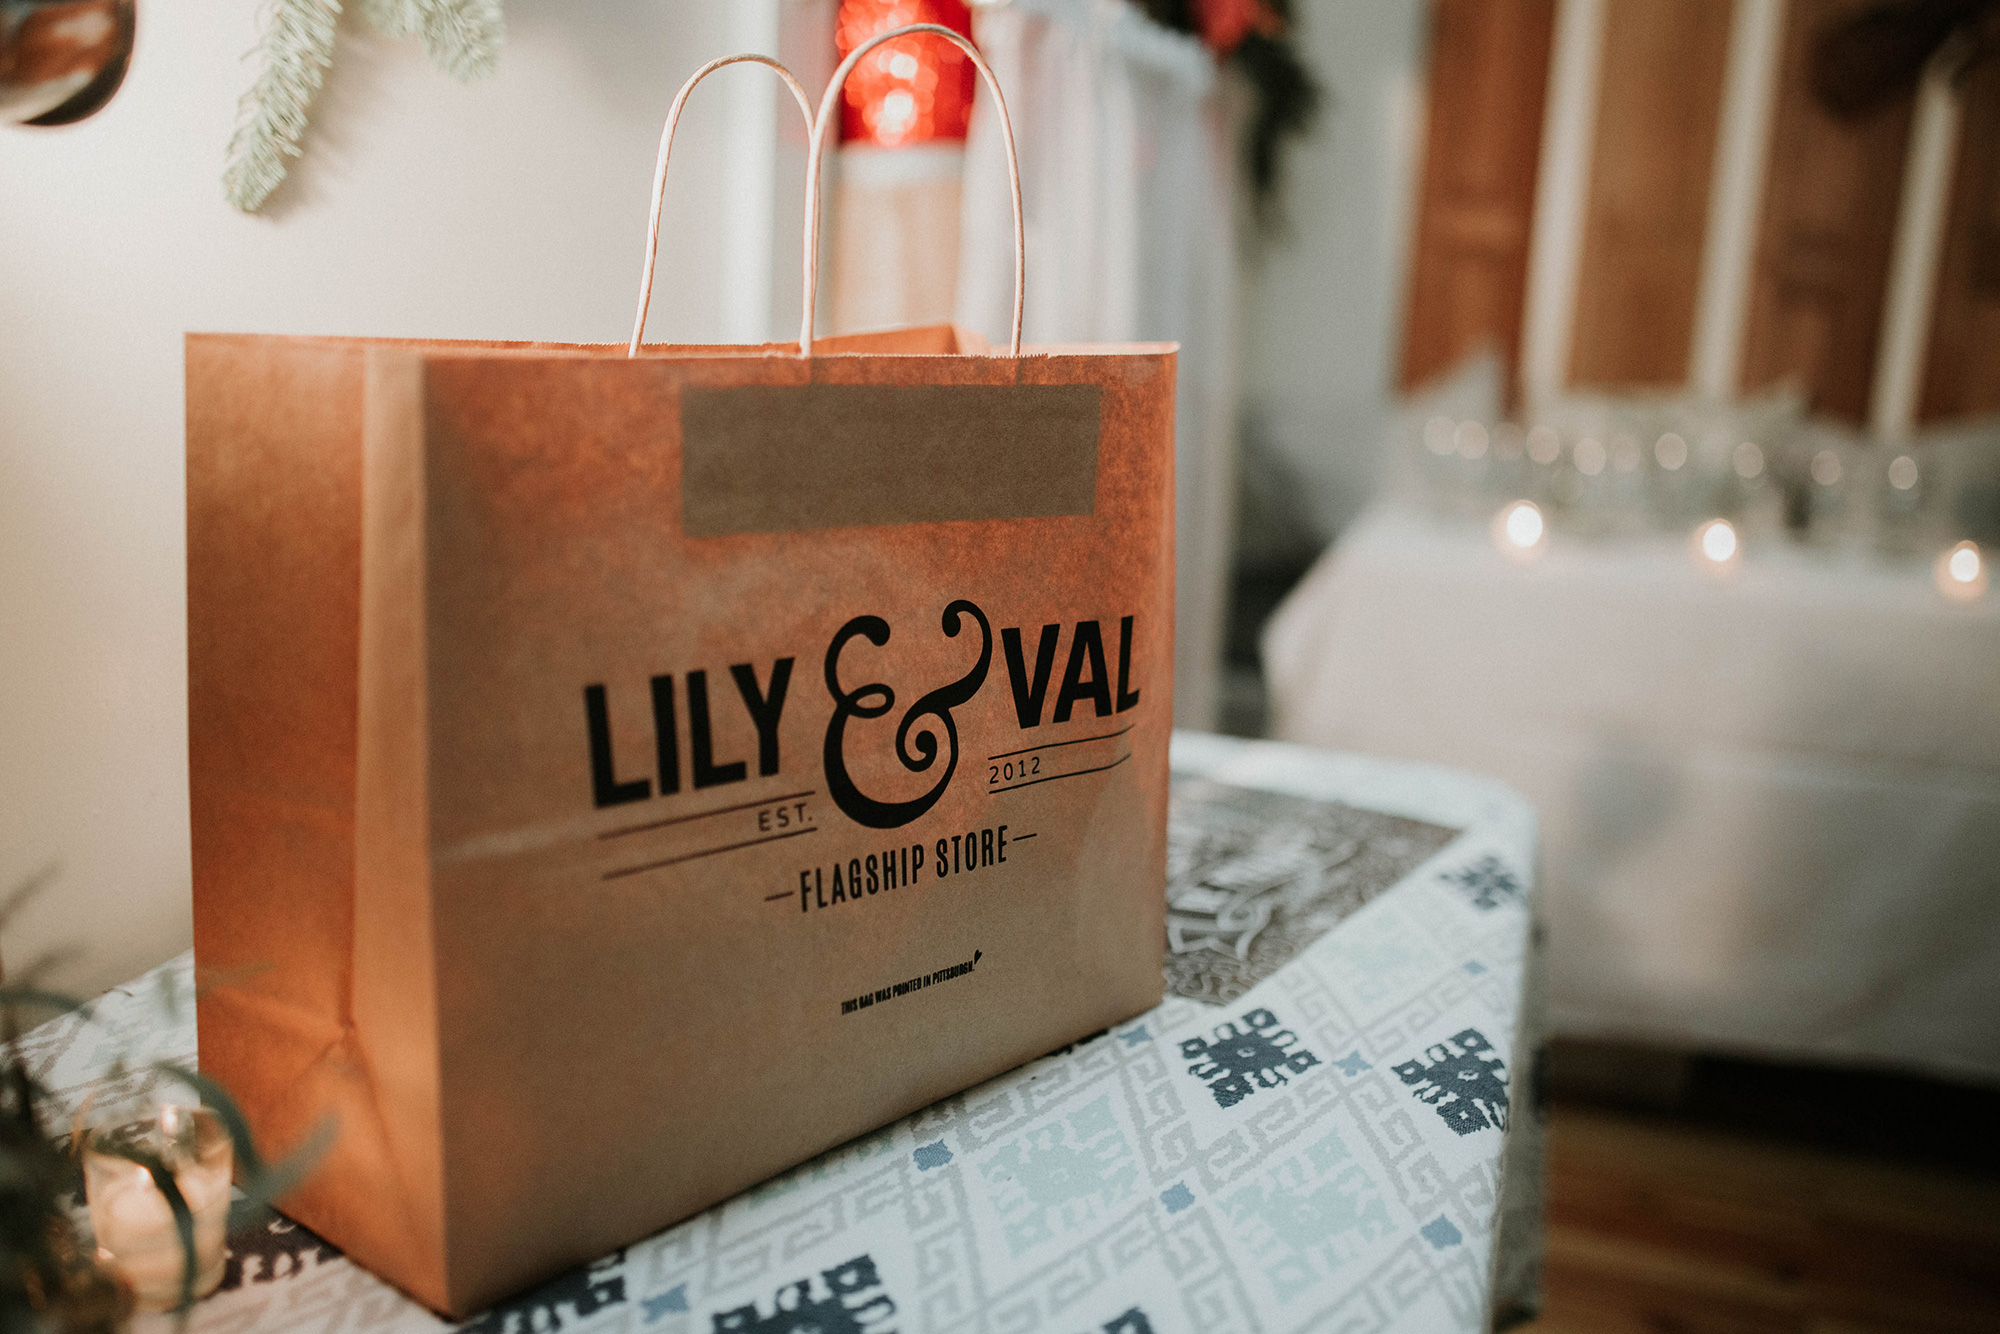 Prizes included goodies from the Lily & Val Flagship Store